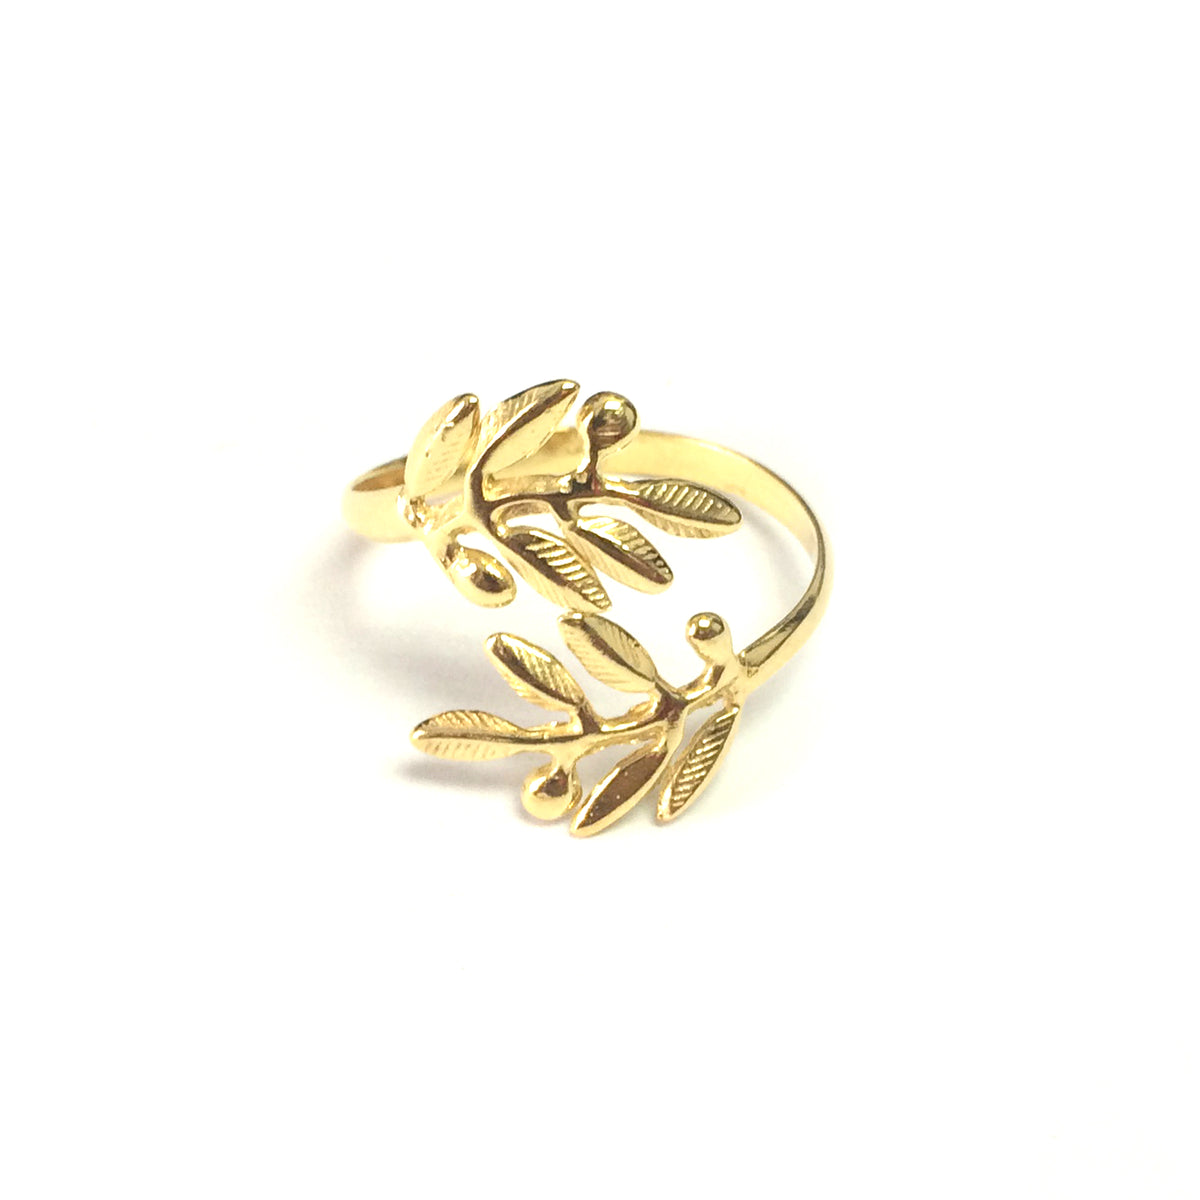 Sterling Silver 18k Gold Overlay Adjustable Olive Leafs Ring, Size 6 fine designer jewelry for men and women